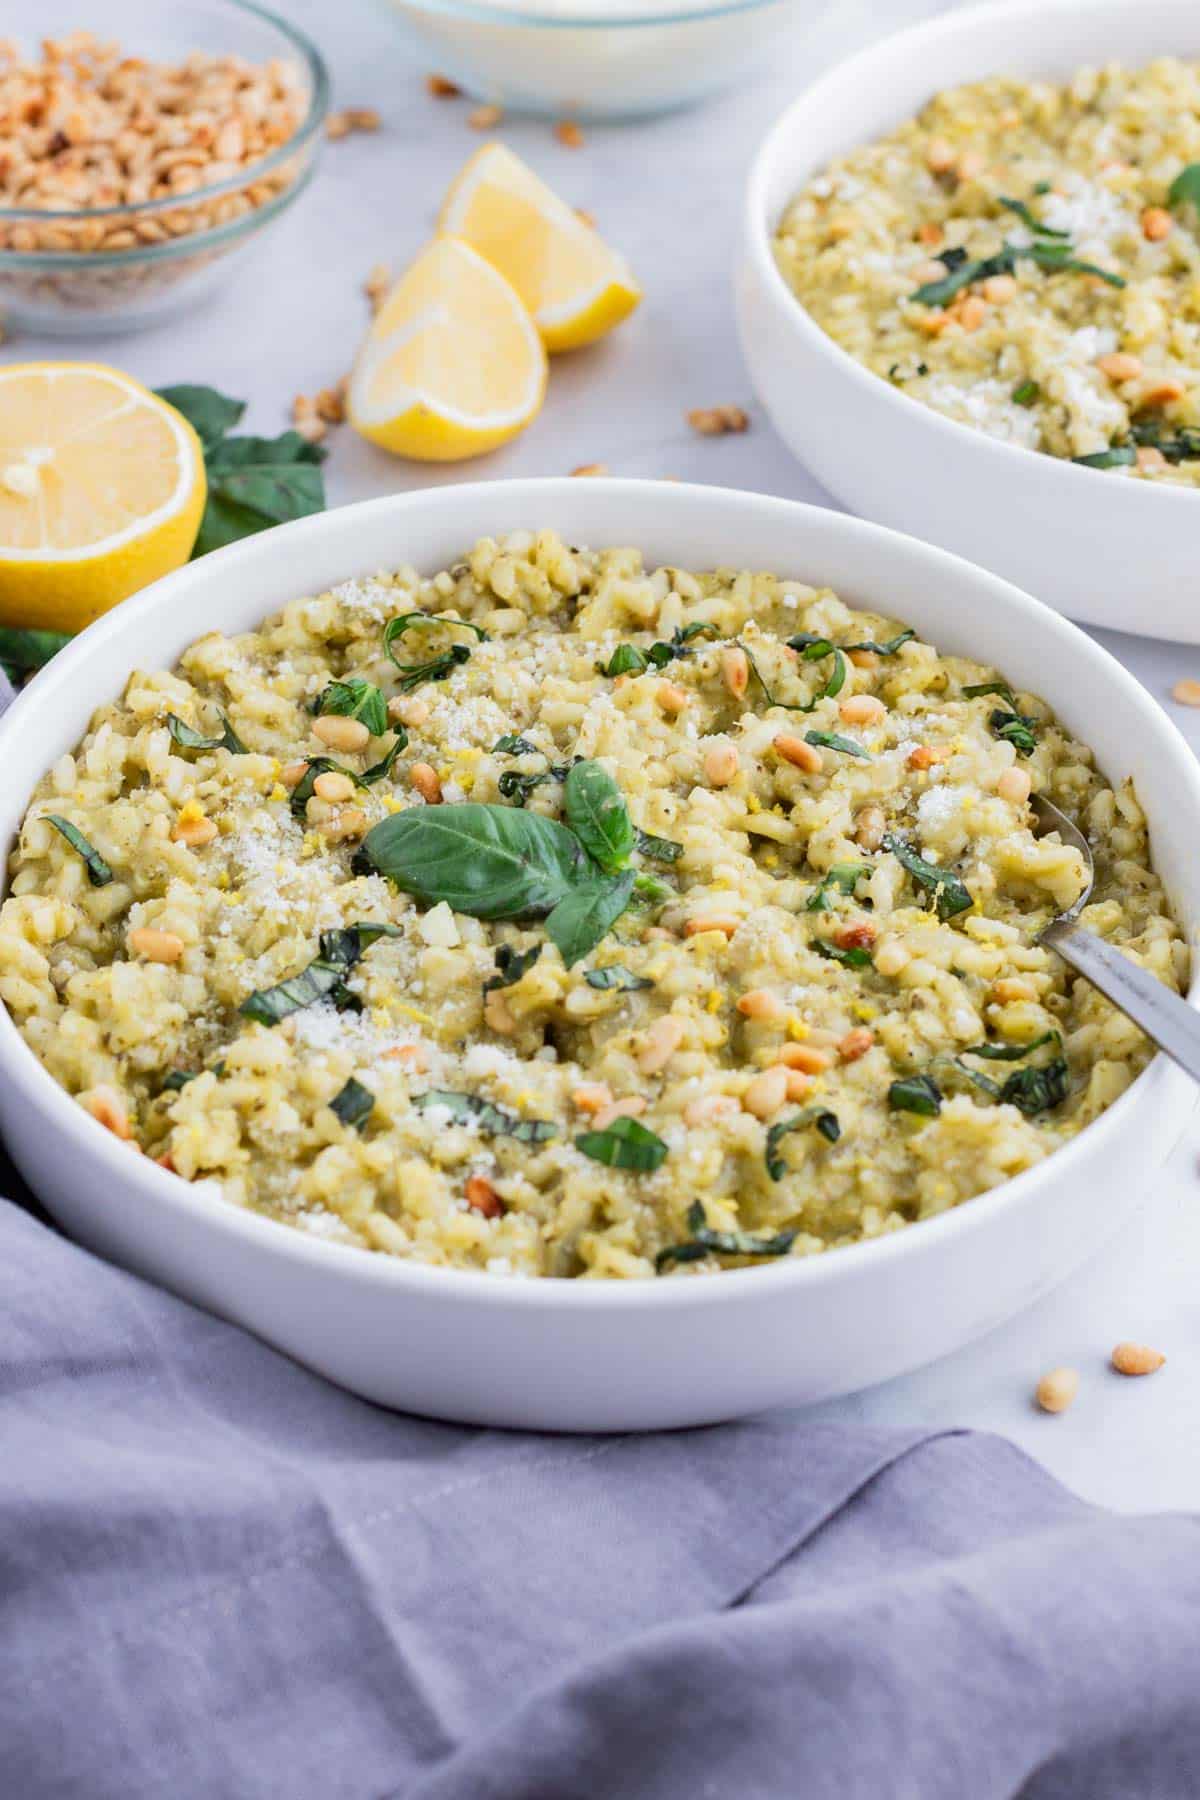 Pesto risotto is topped with fresh basil and served in a white bowl.